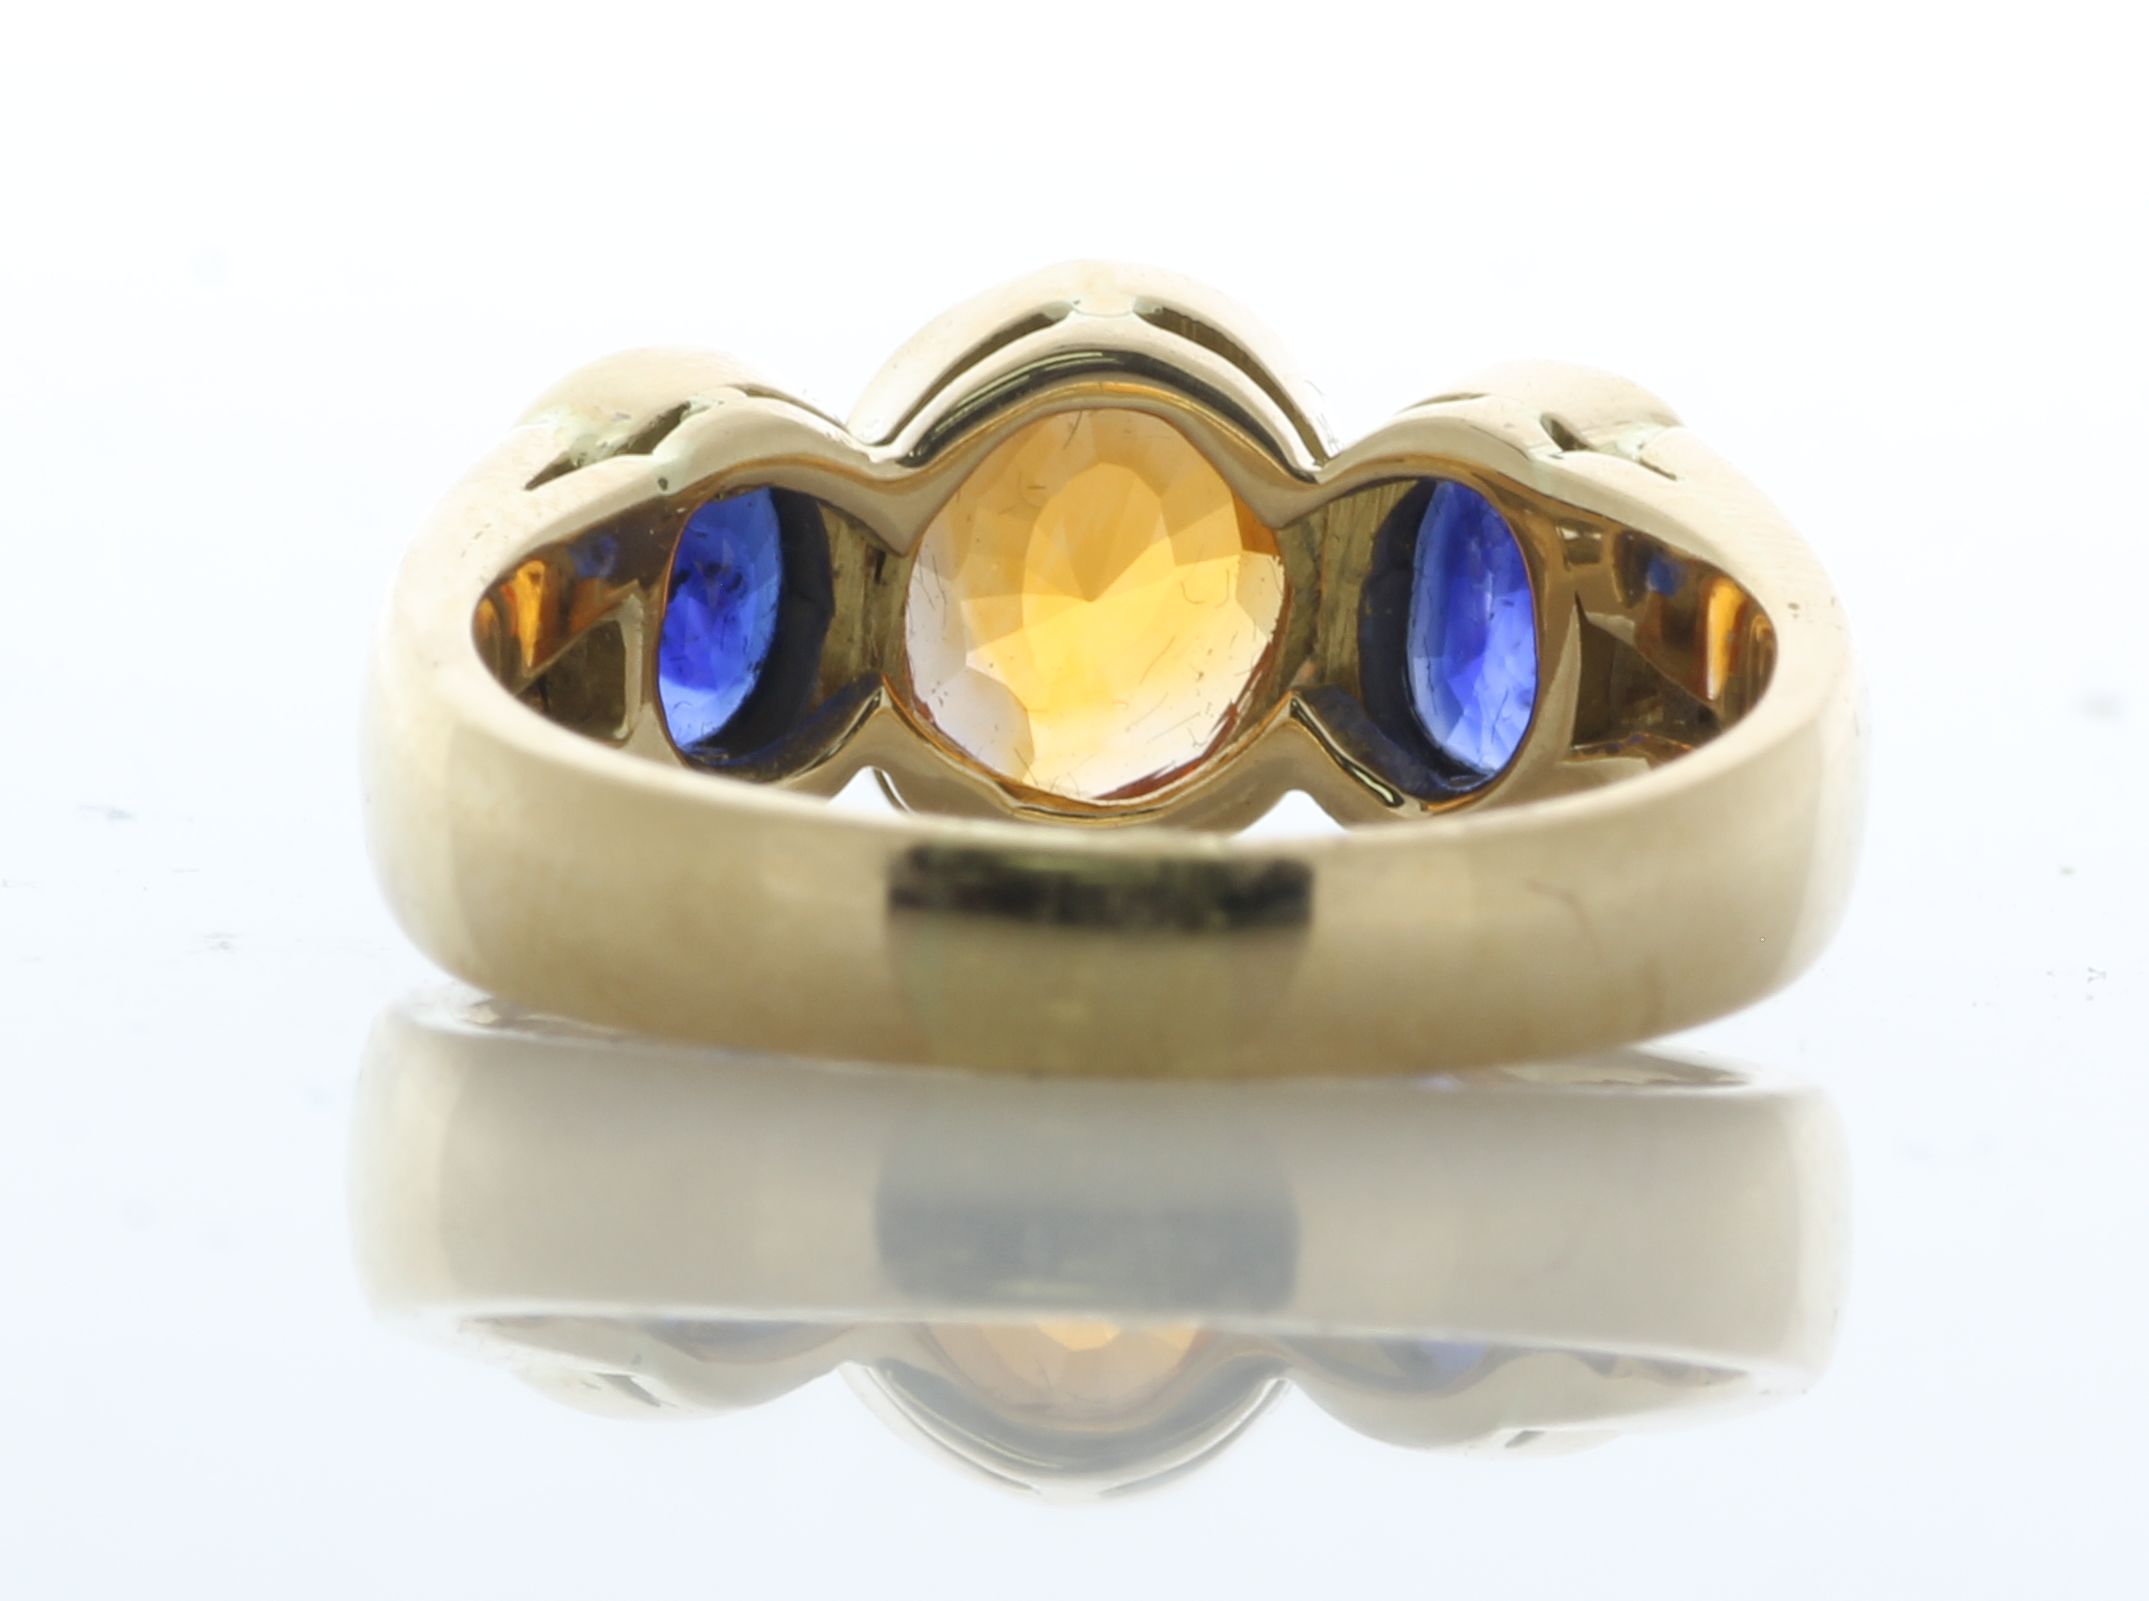 18ct Yellow Gold Three Stone Oval Cut GIA Orange Sapphire Center Ring (S2.31) 0.10 Carats - Image 4 of 5